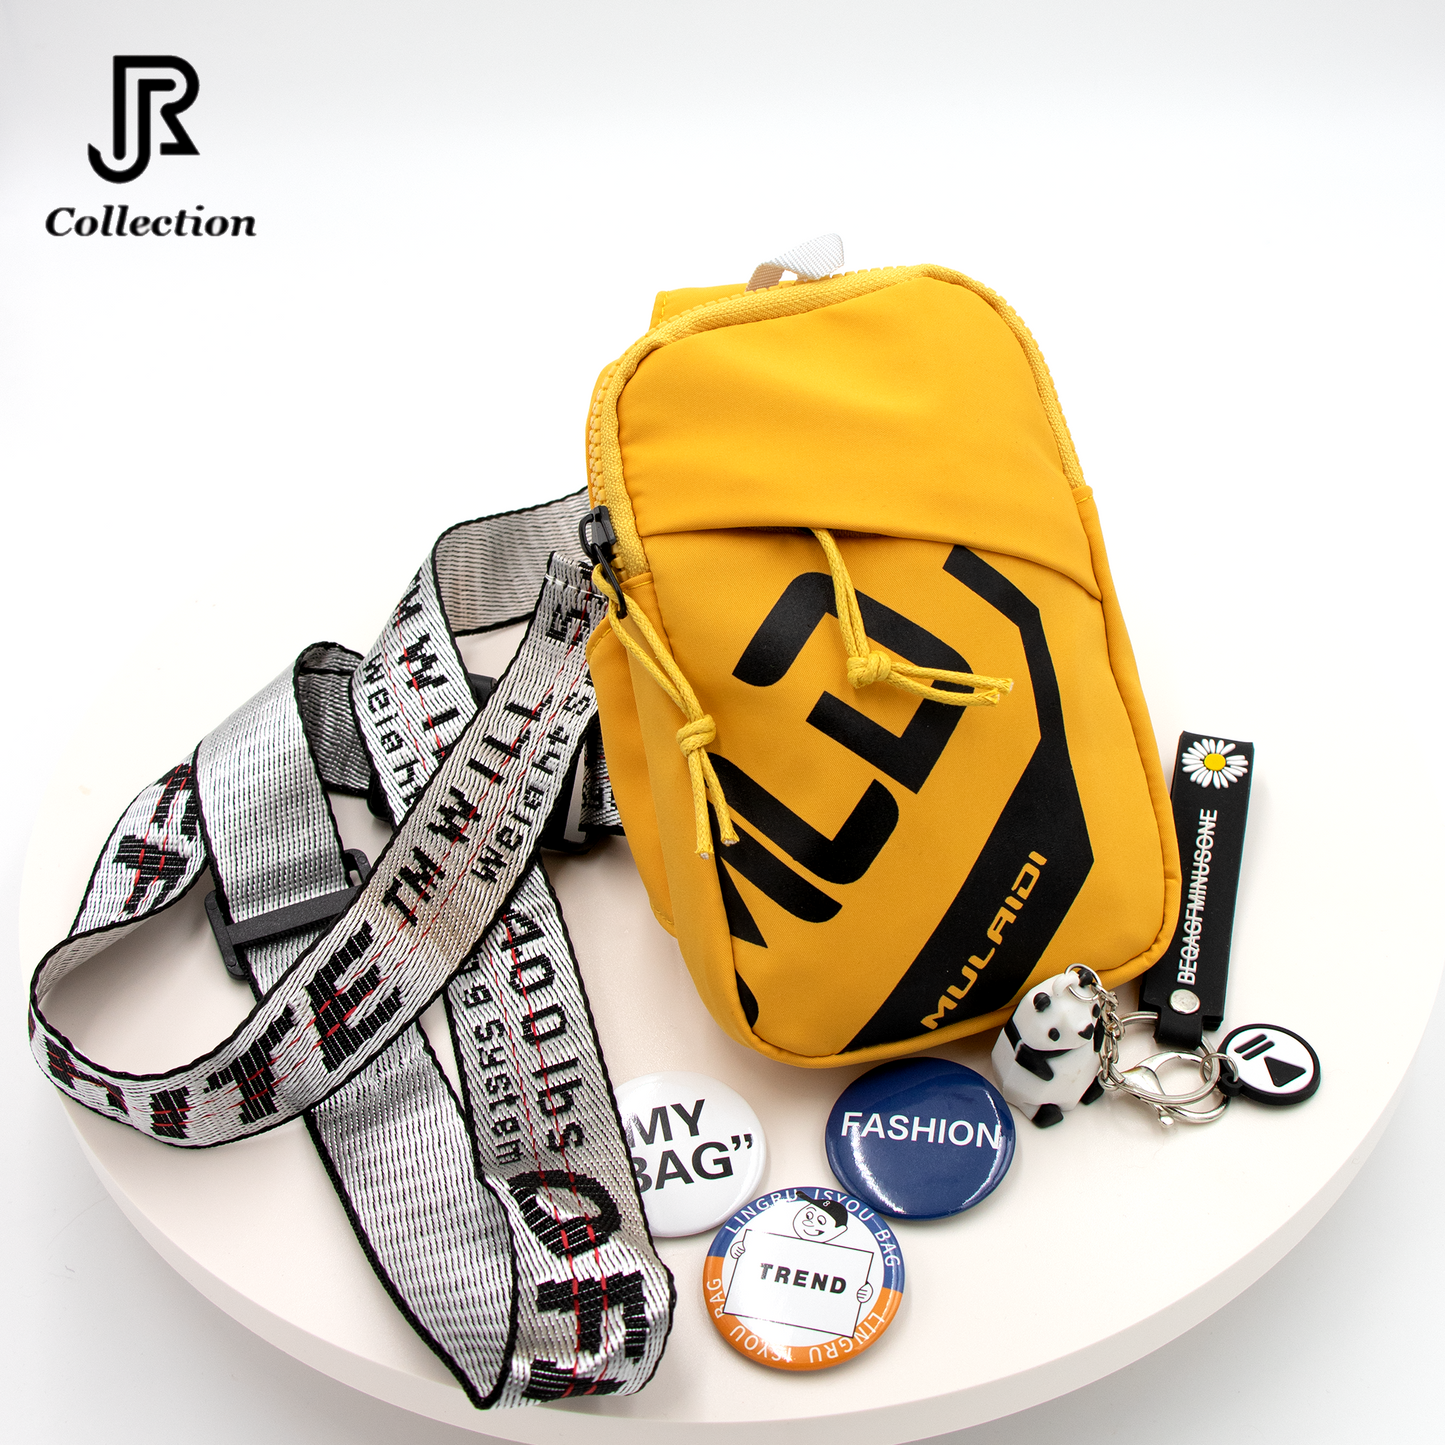 Fashionable Colorful Shoulder Bag, Chest Bag, Sling Cross Bag, Casual Handbag, Travel Phone Bag, Gift,Anniversary,Customized by RJcollection